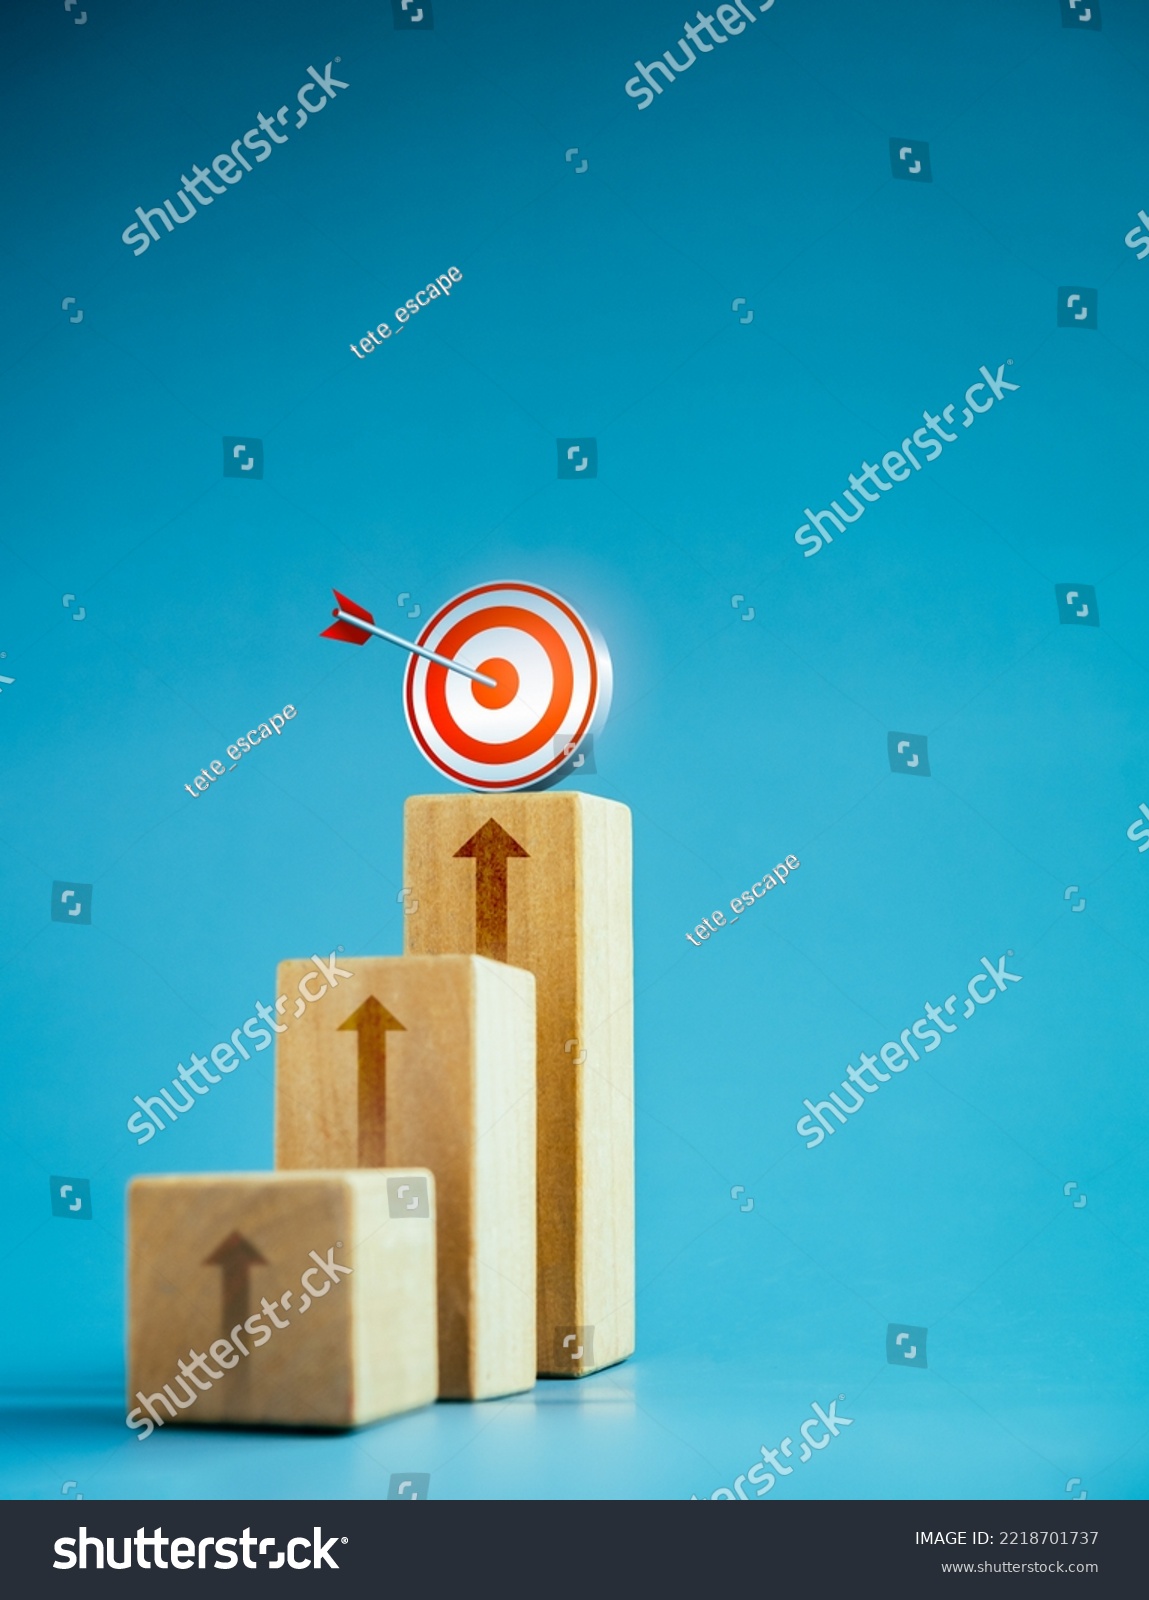 Target icon on top of wooden blocks with rise up arrows, 3d bar graph chart steps on blue background, vertical style, business growth process, profit, investment, economic improvement concepts. #2218701737